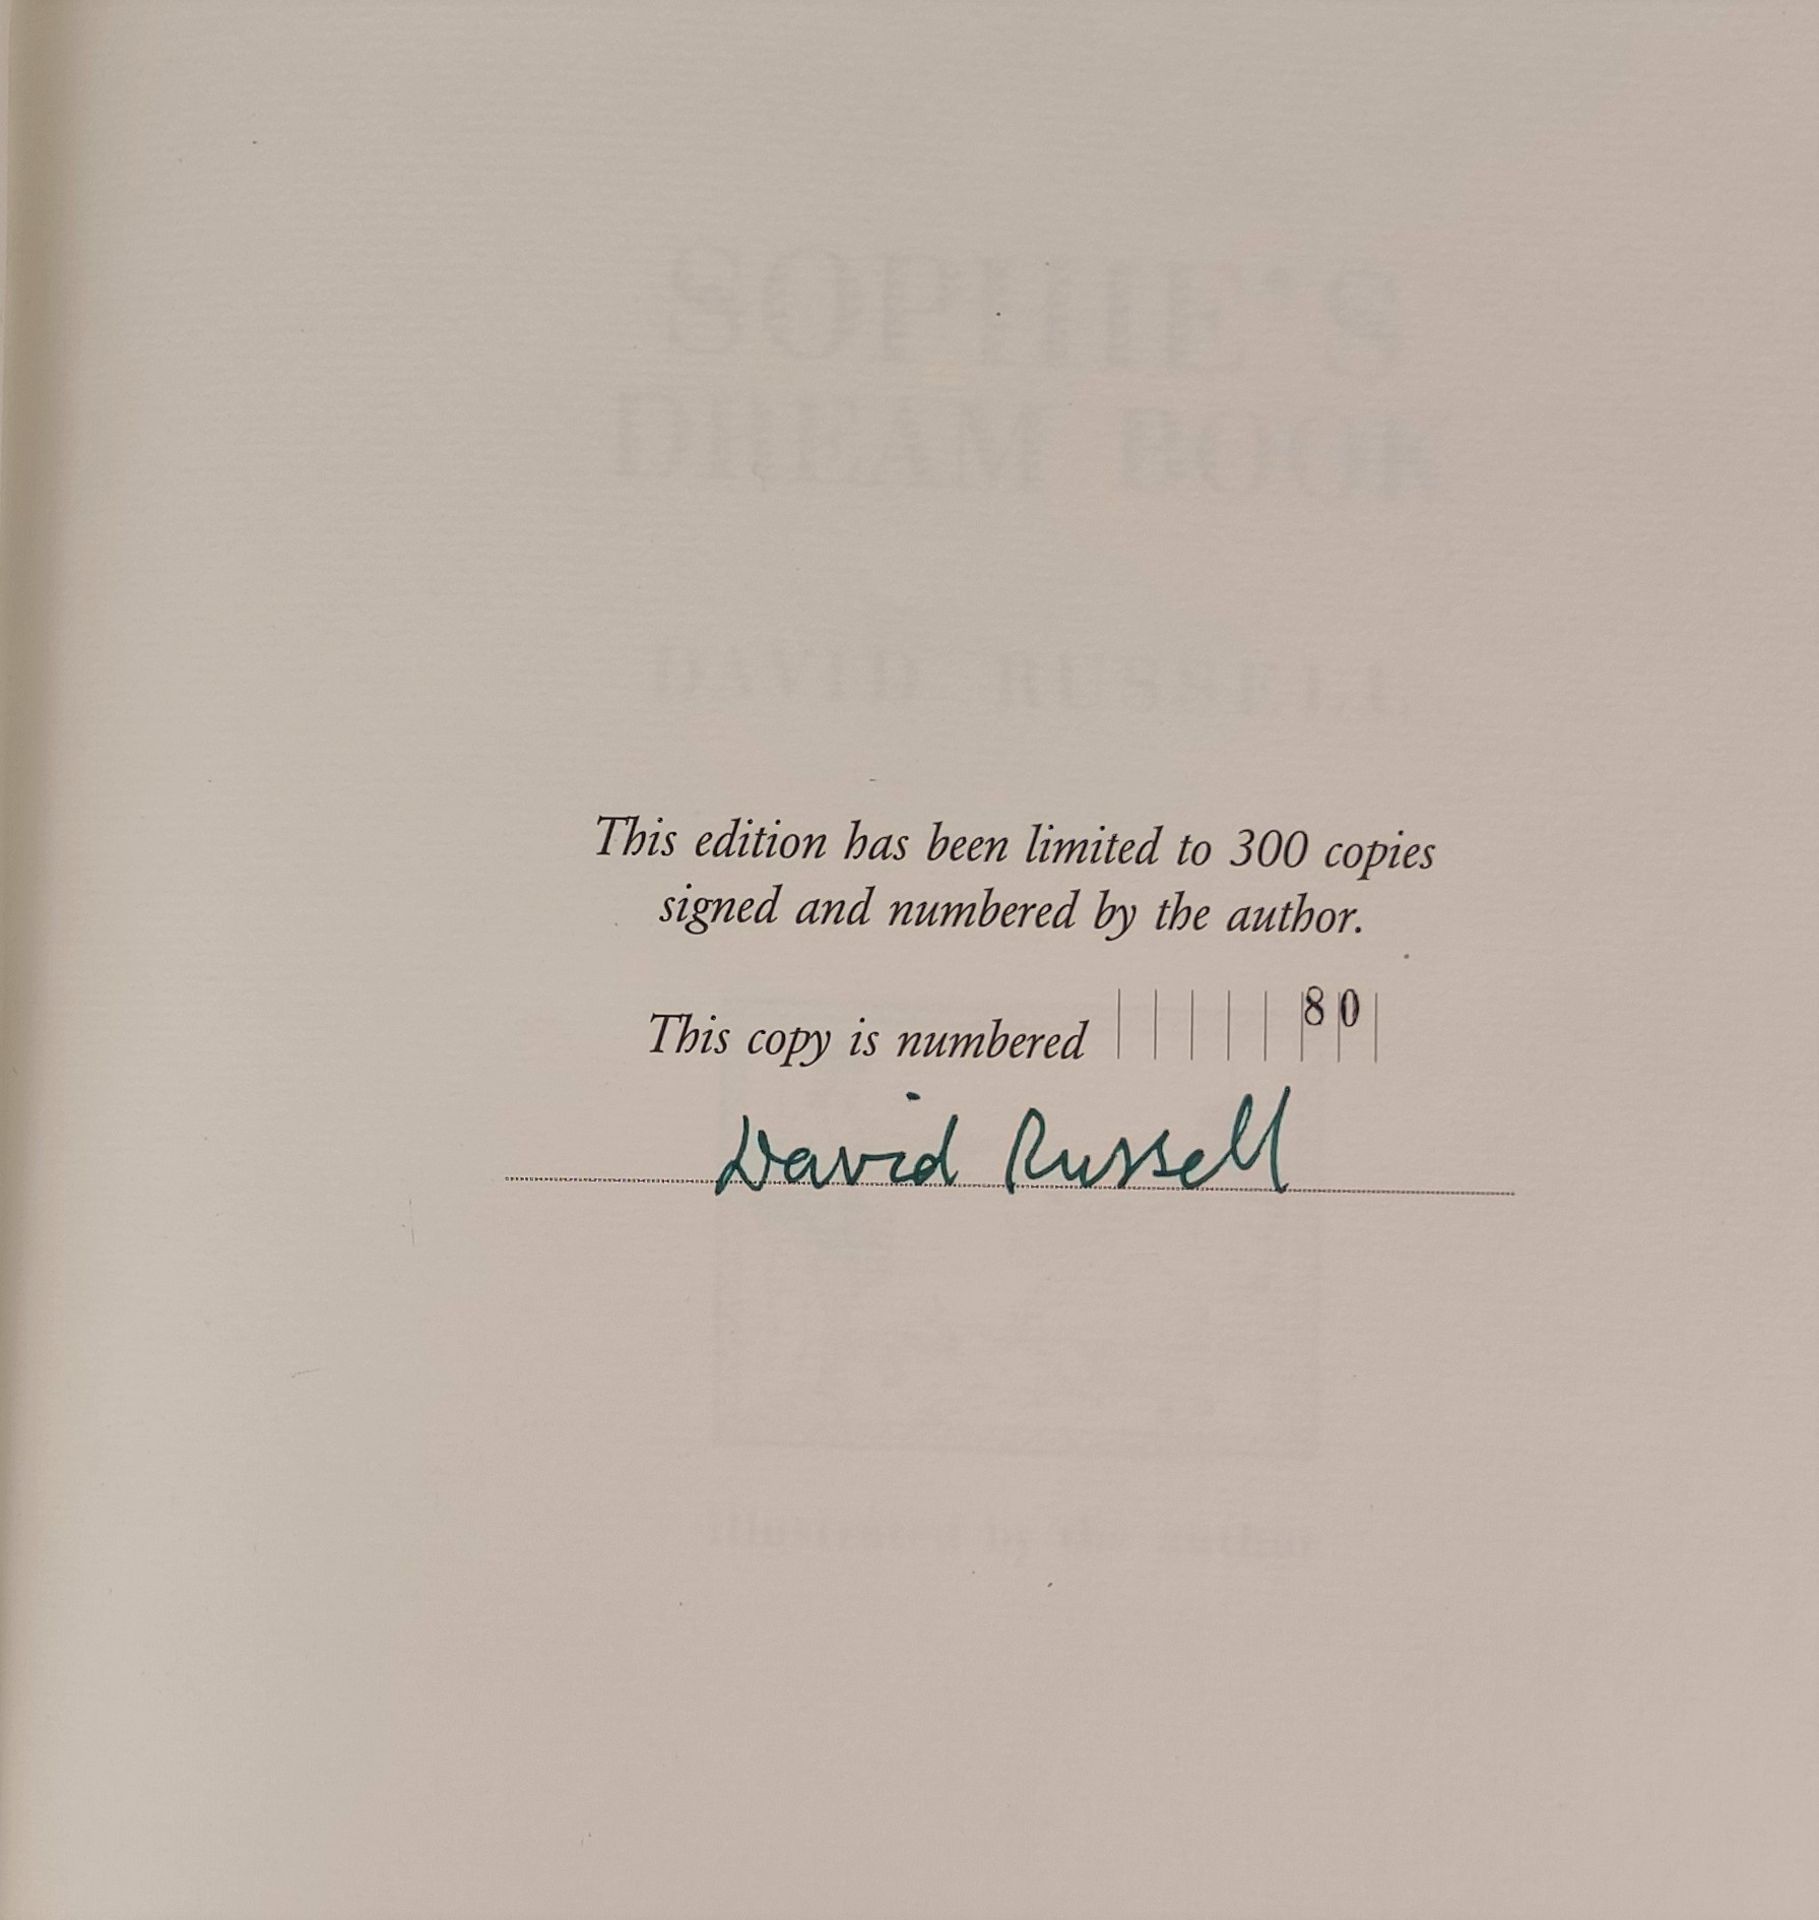 Erotica: Russel, David (20th/21st century) "Sophie's Dream Book", with illustrations by the author, - Image 2 of 6